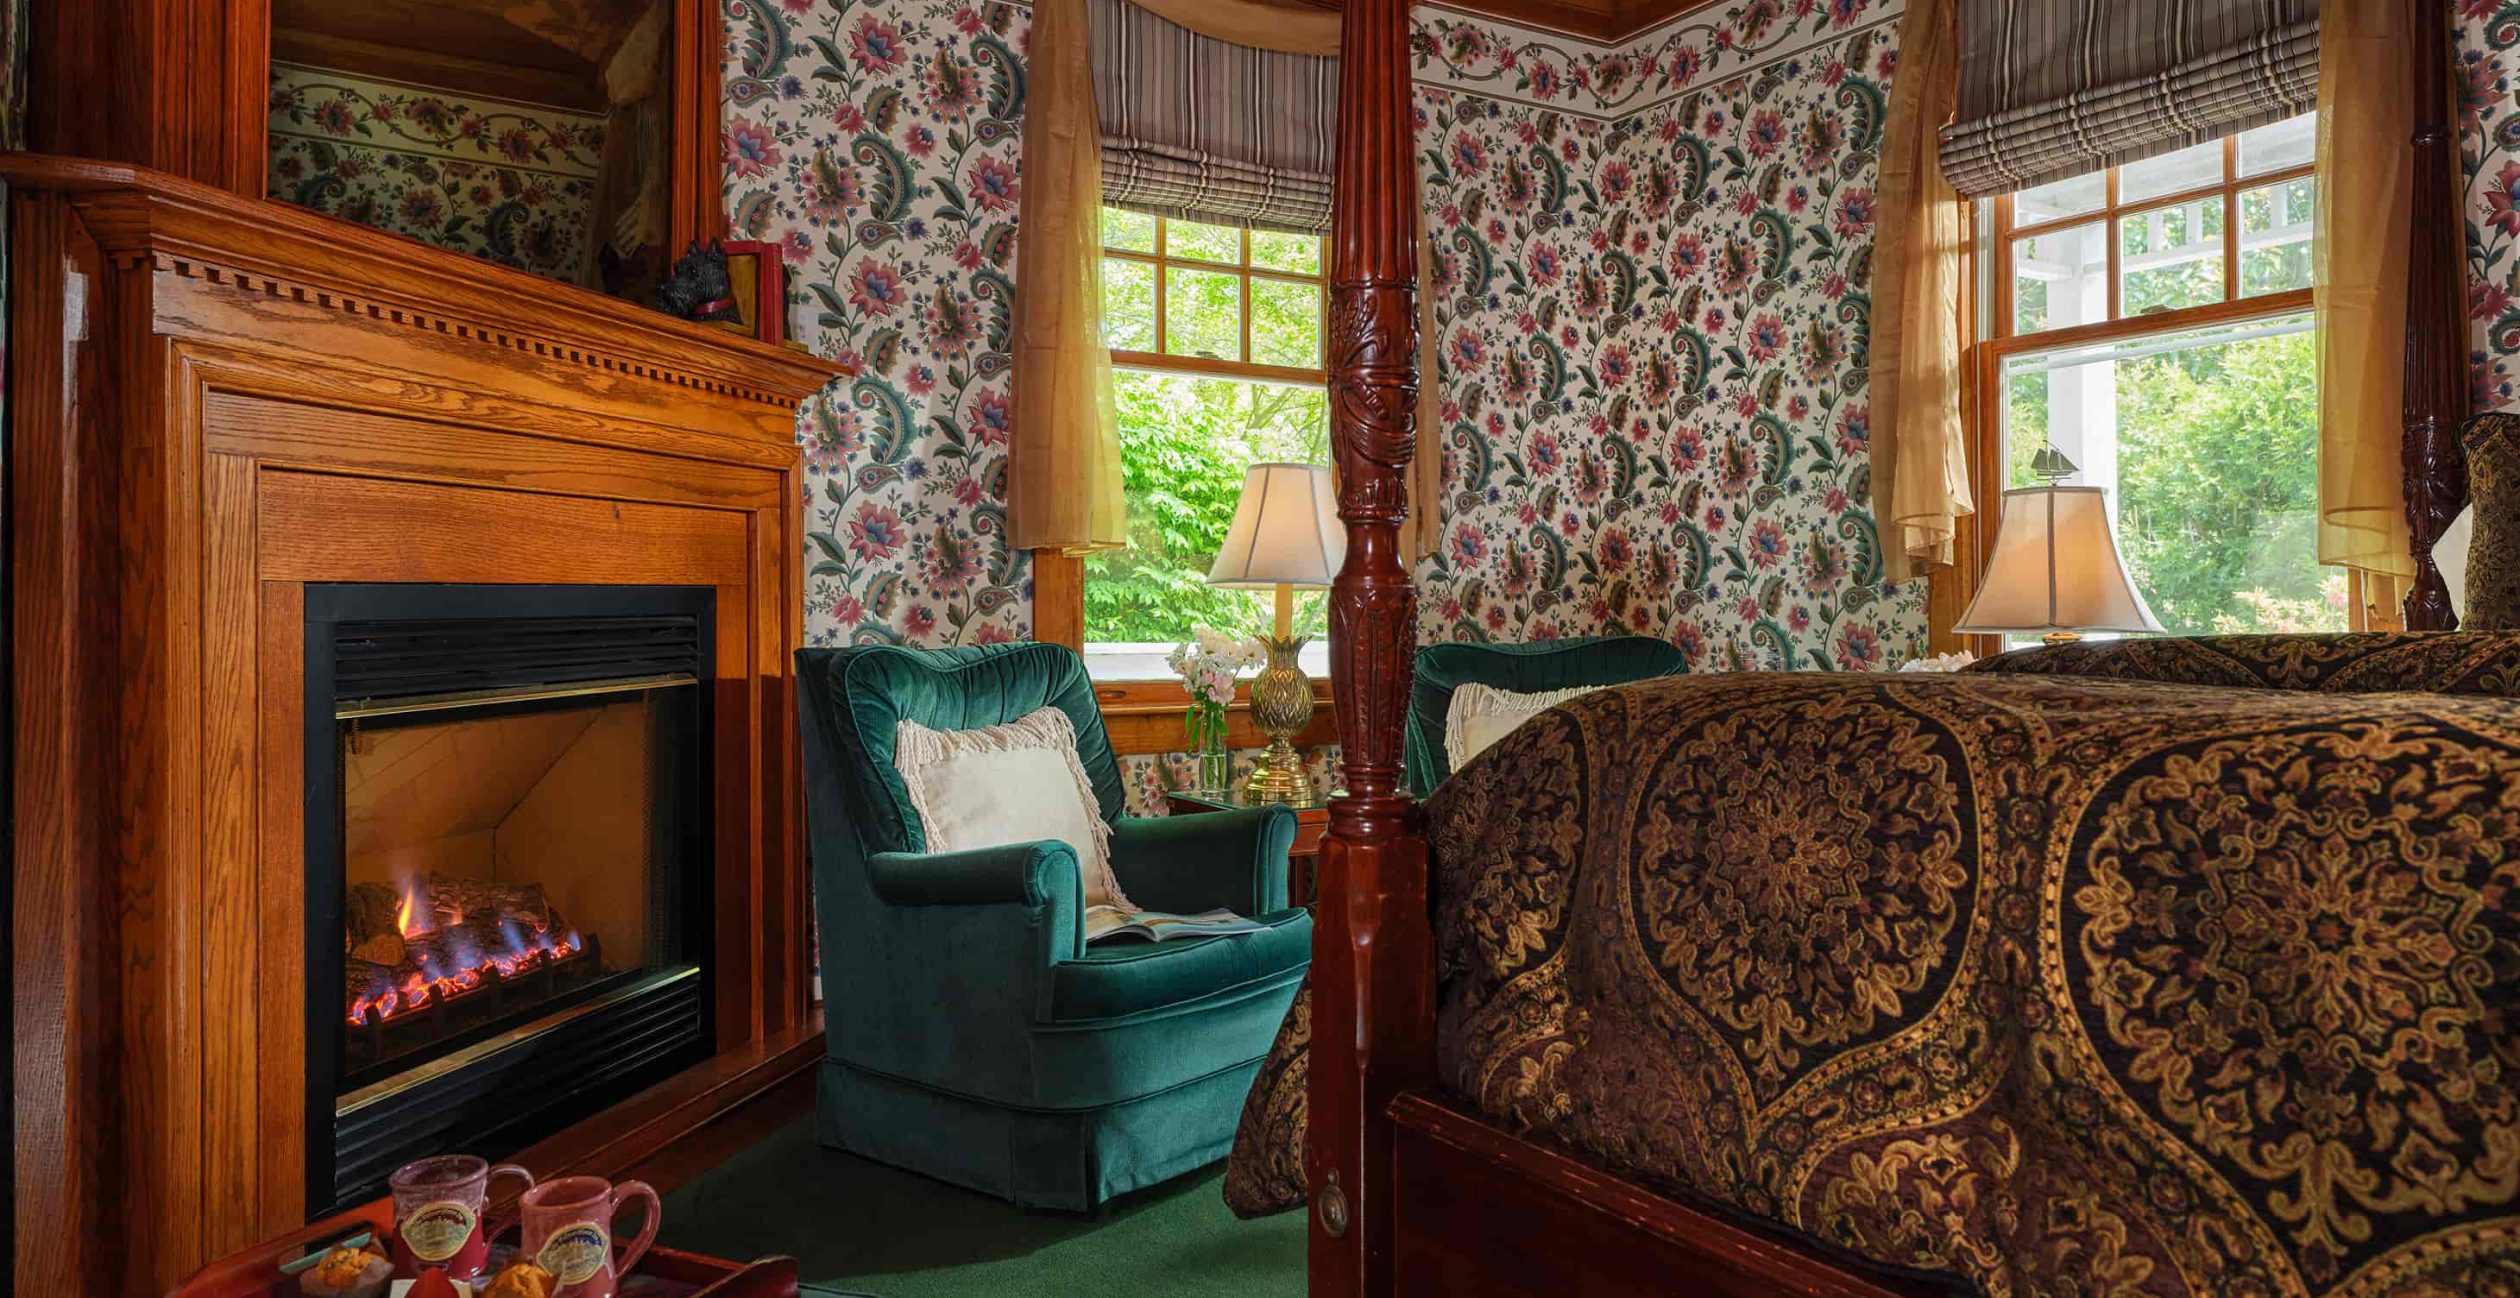 Theodore Roosevelt Room is one of the best places to stay in Falmouth, MA